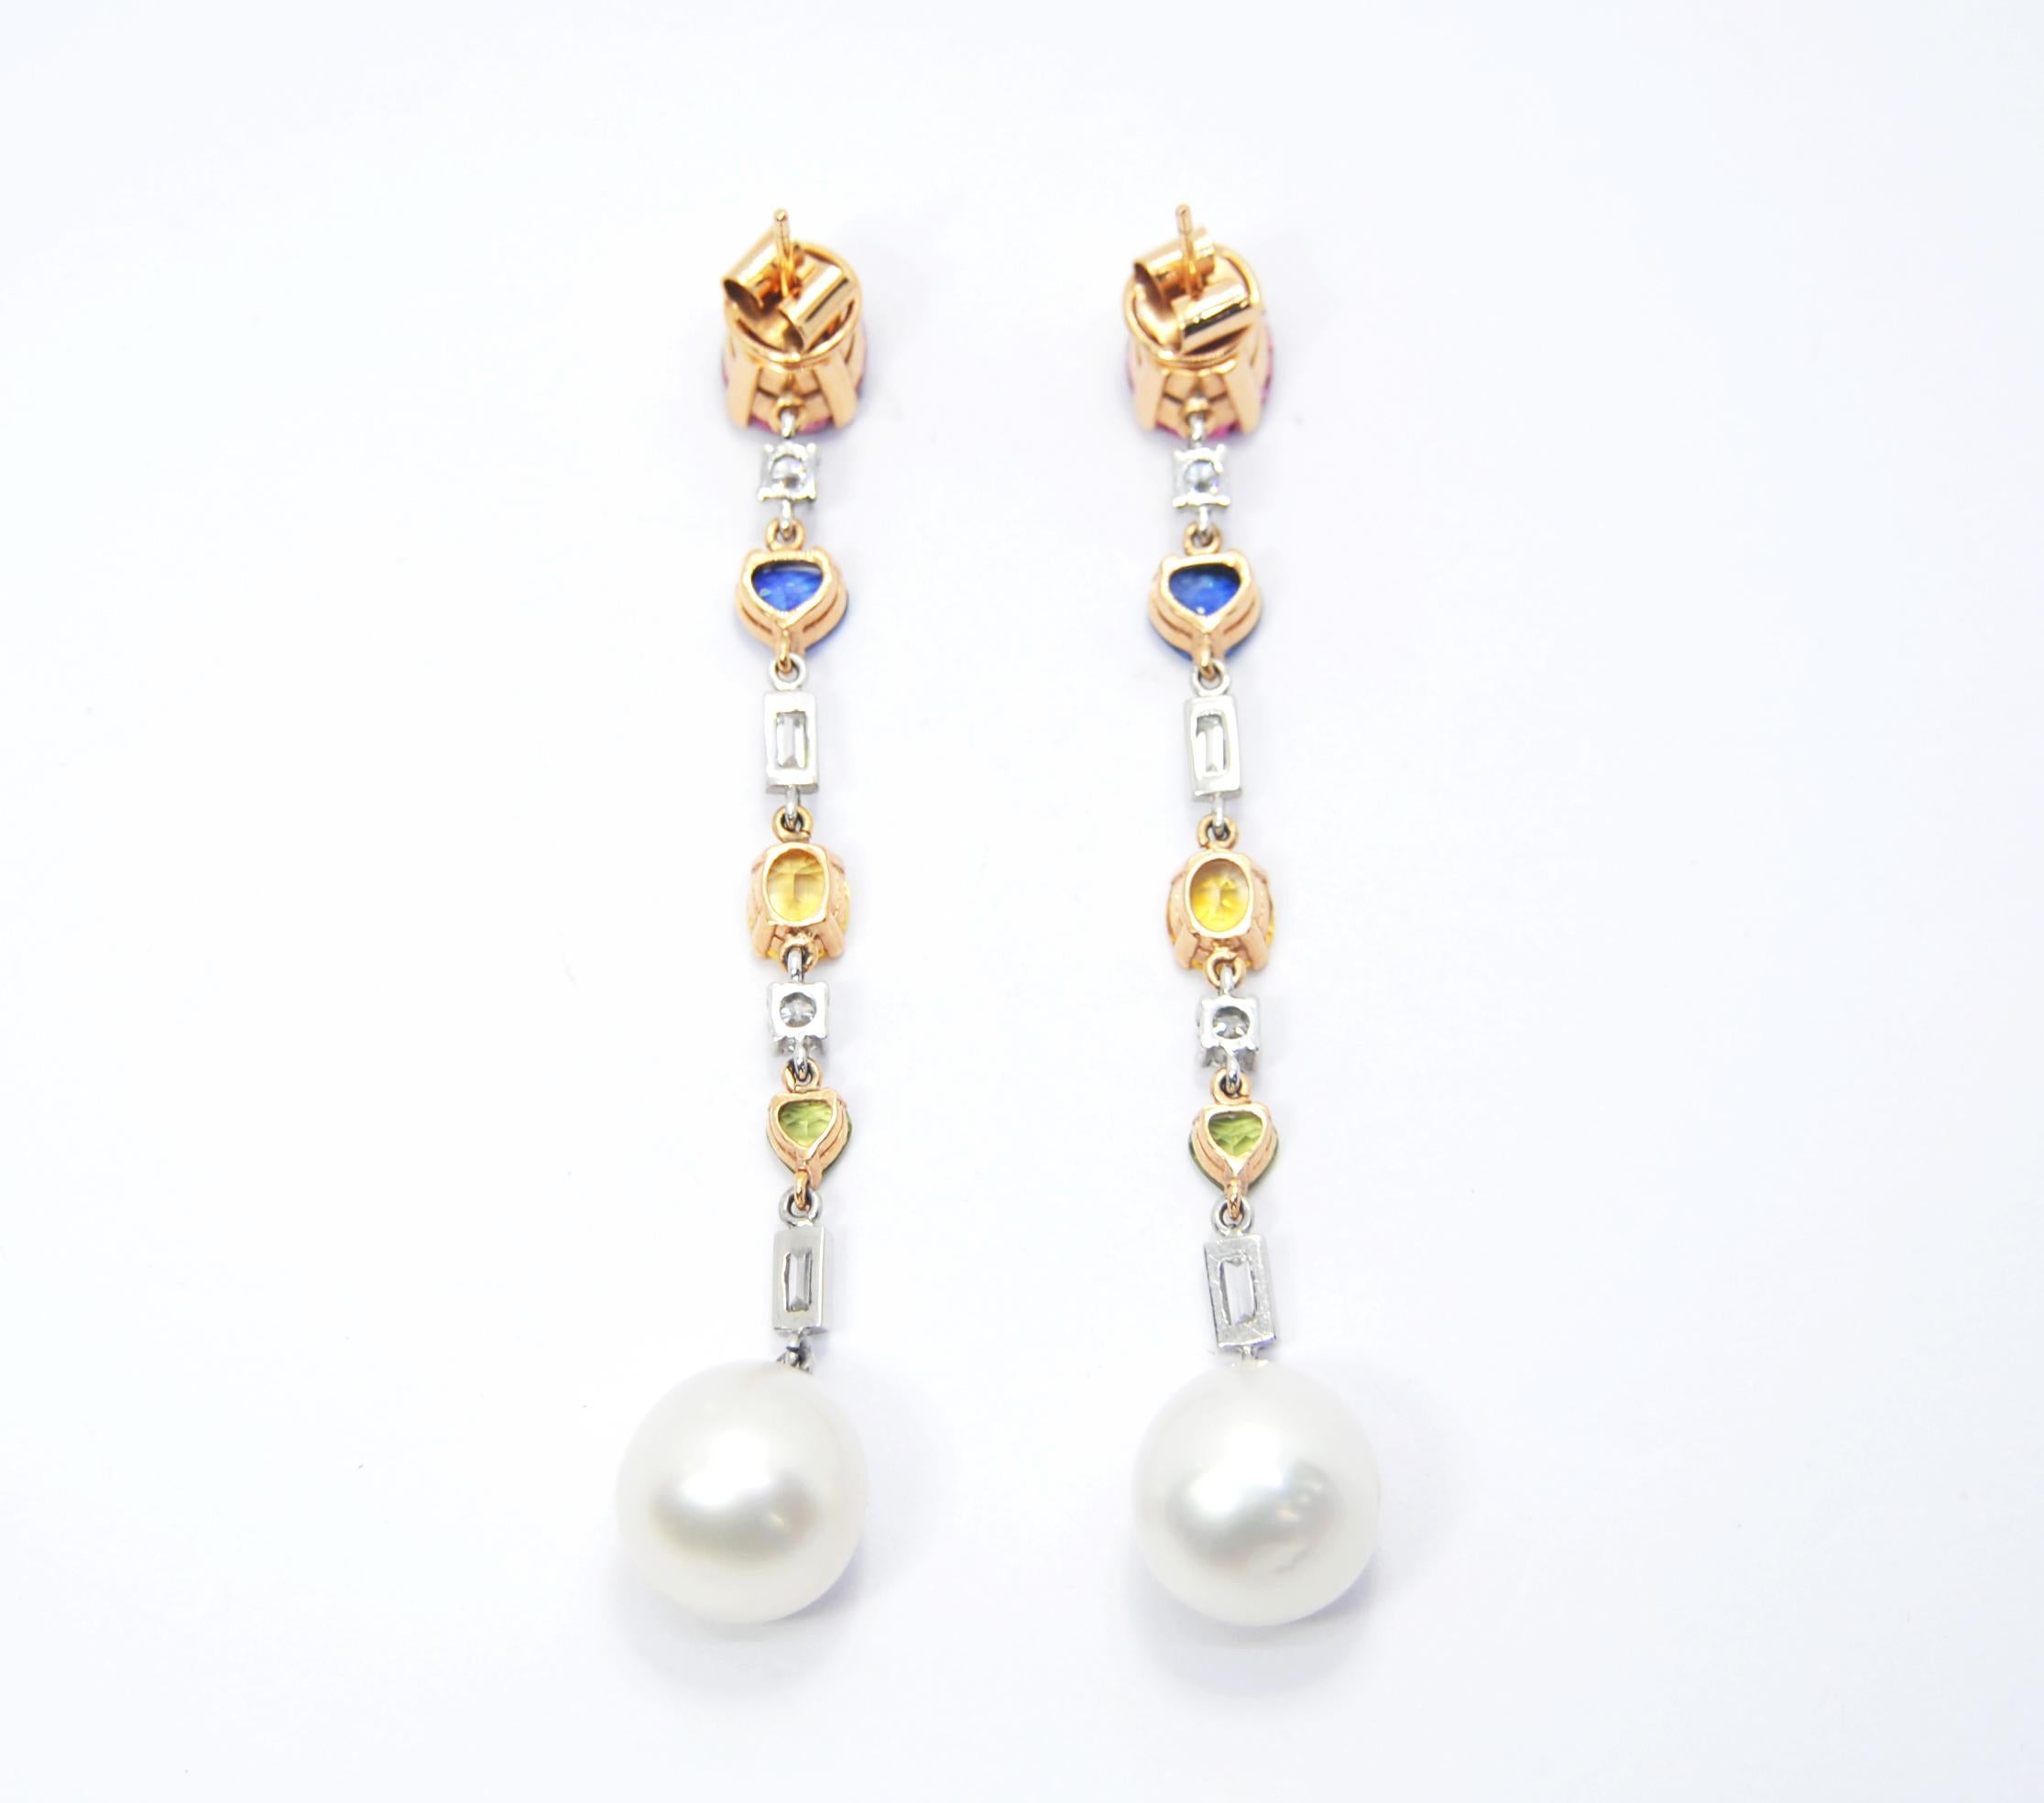 Irama Pradera is a Young designer from Spain that searches always for the best gems and combines classic with contemporary mounting and styles. 
The earrings are made of yellow and white 18kt gold and the diamonds and colored gems come  in four